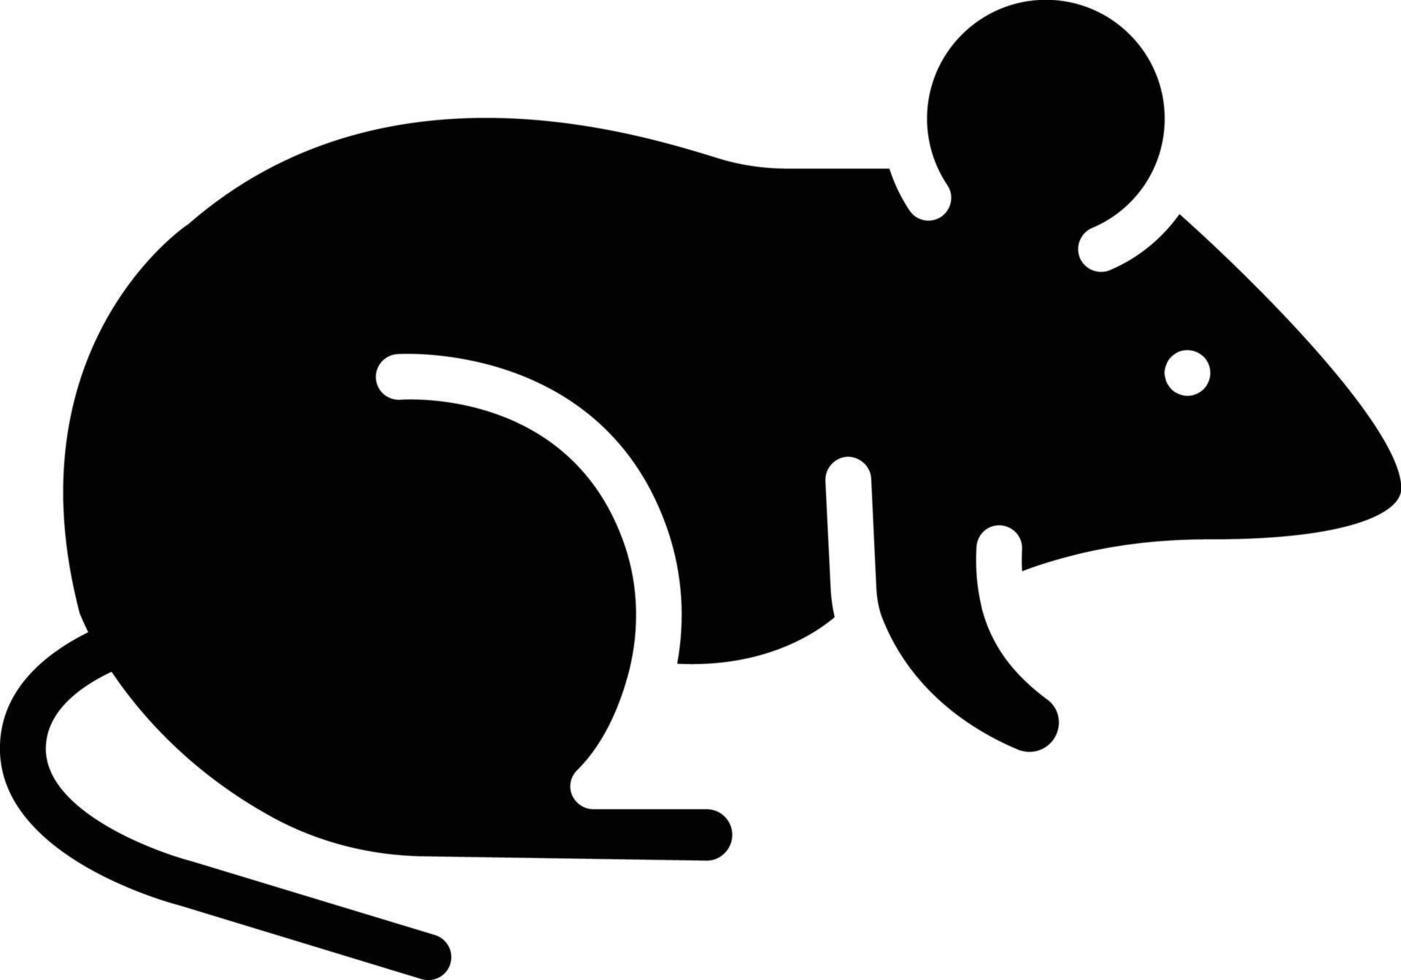 rat vector illustration on a background.Premium quality symbols.vector icons for concept and graphic design.